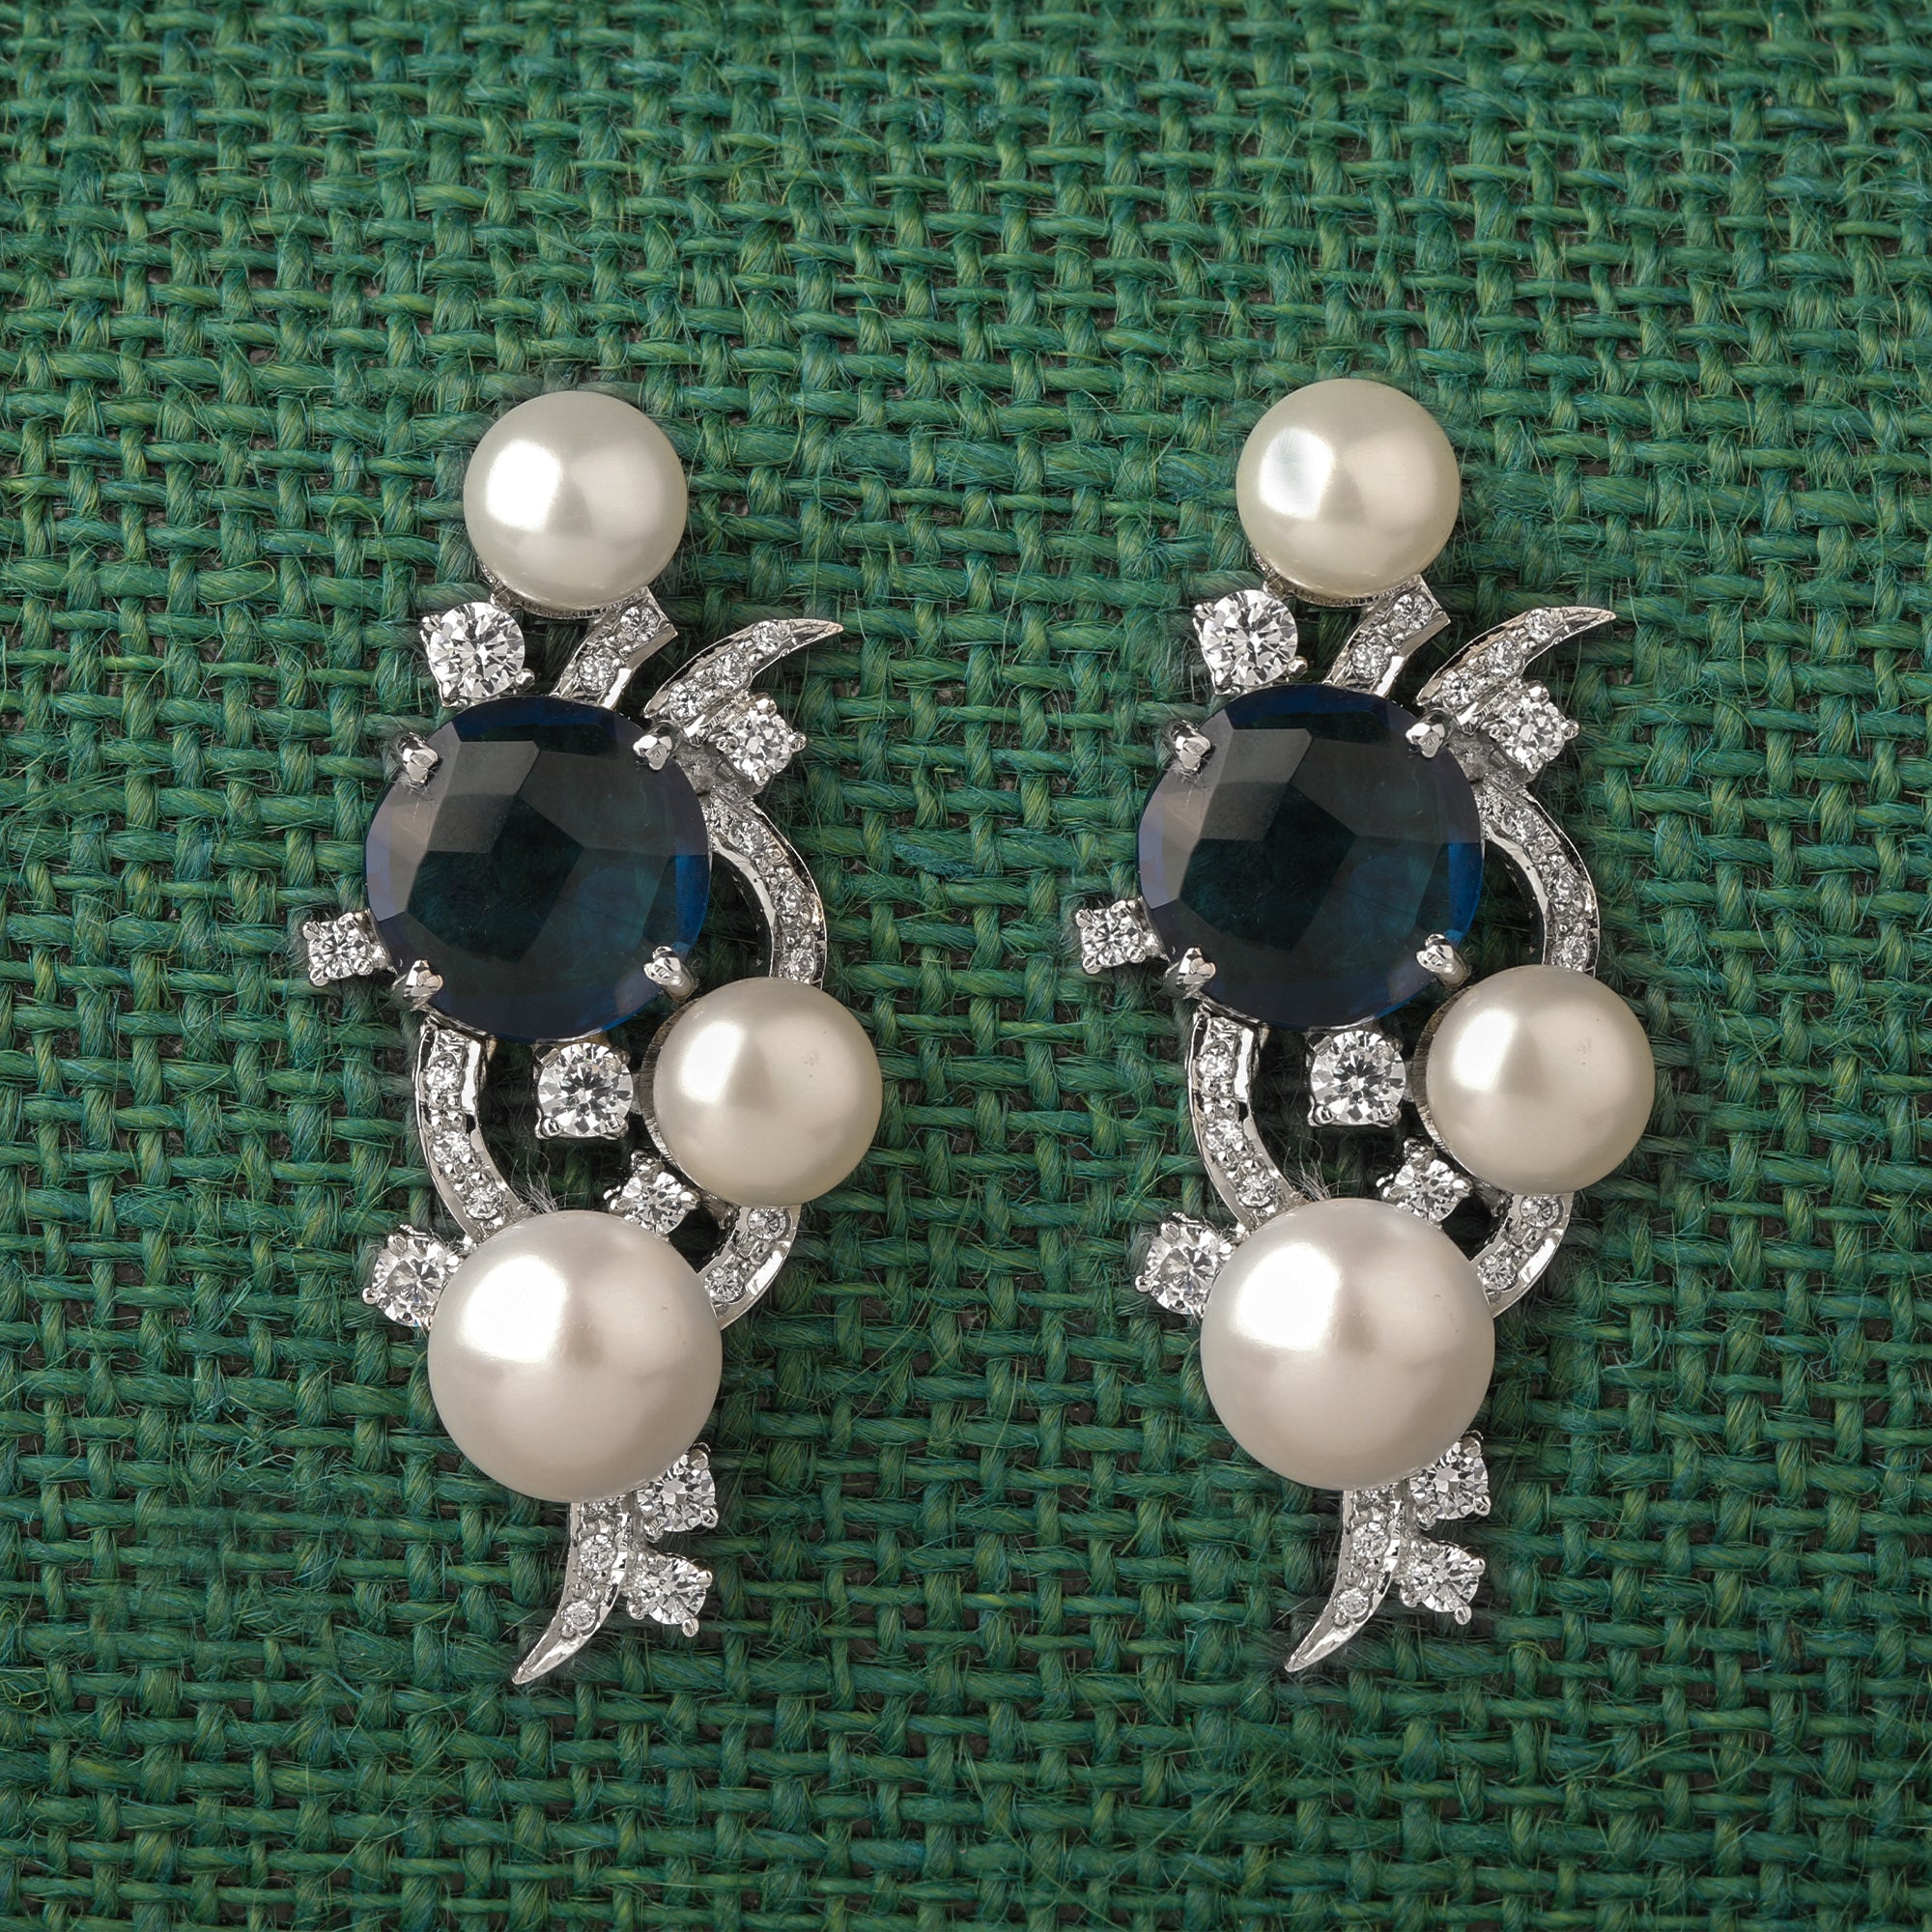 Vintage-Inspired Sapphire and Pearl Elegance Jewelry Set